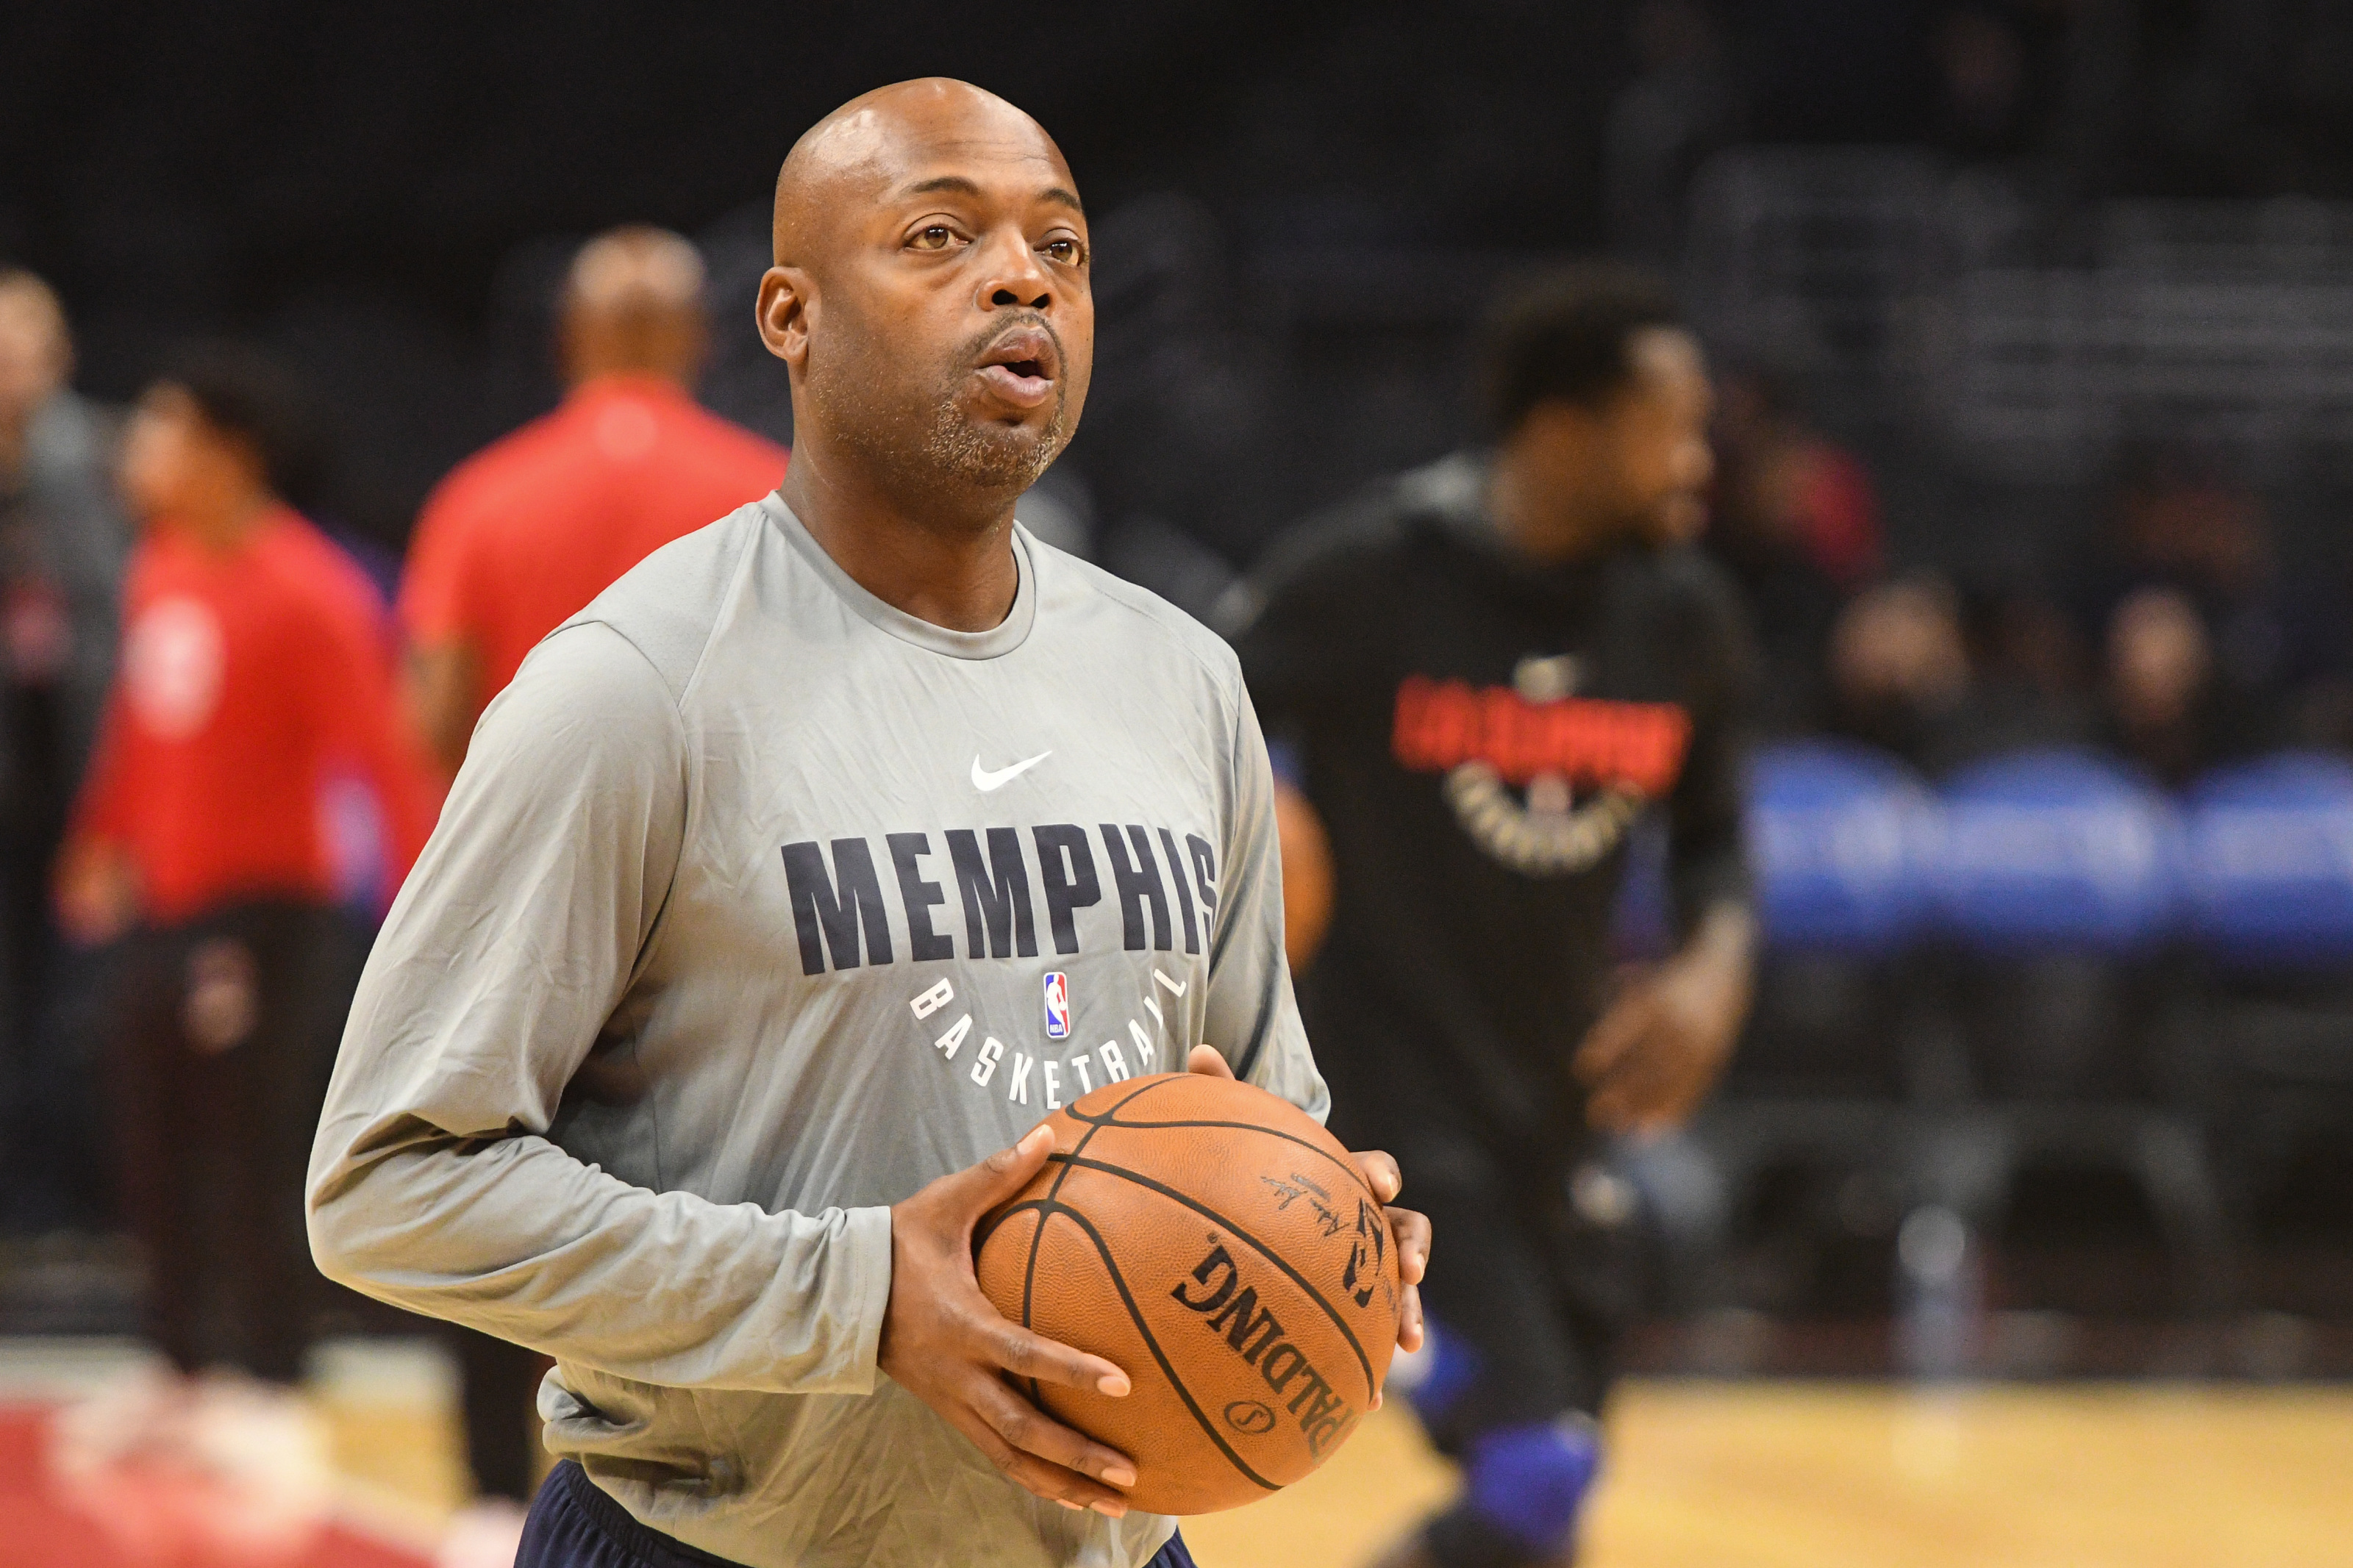 Nick Van Exel made a memorable All-Star Game appearance in 1998 